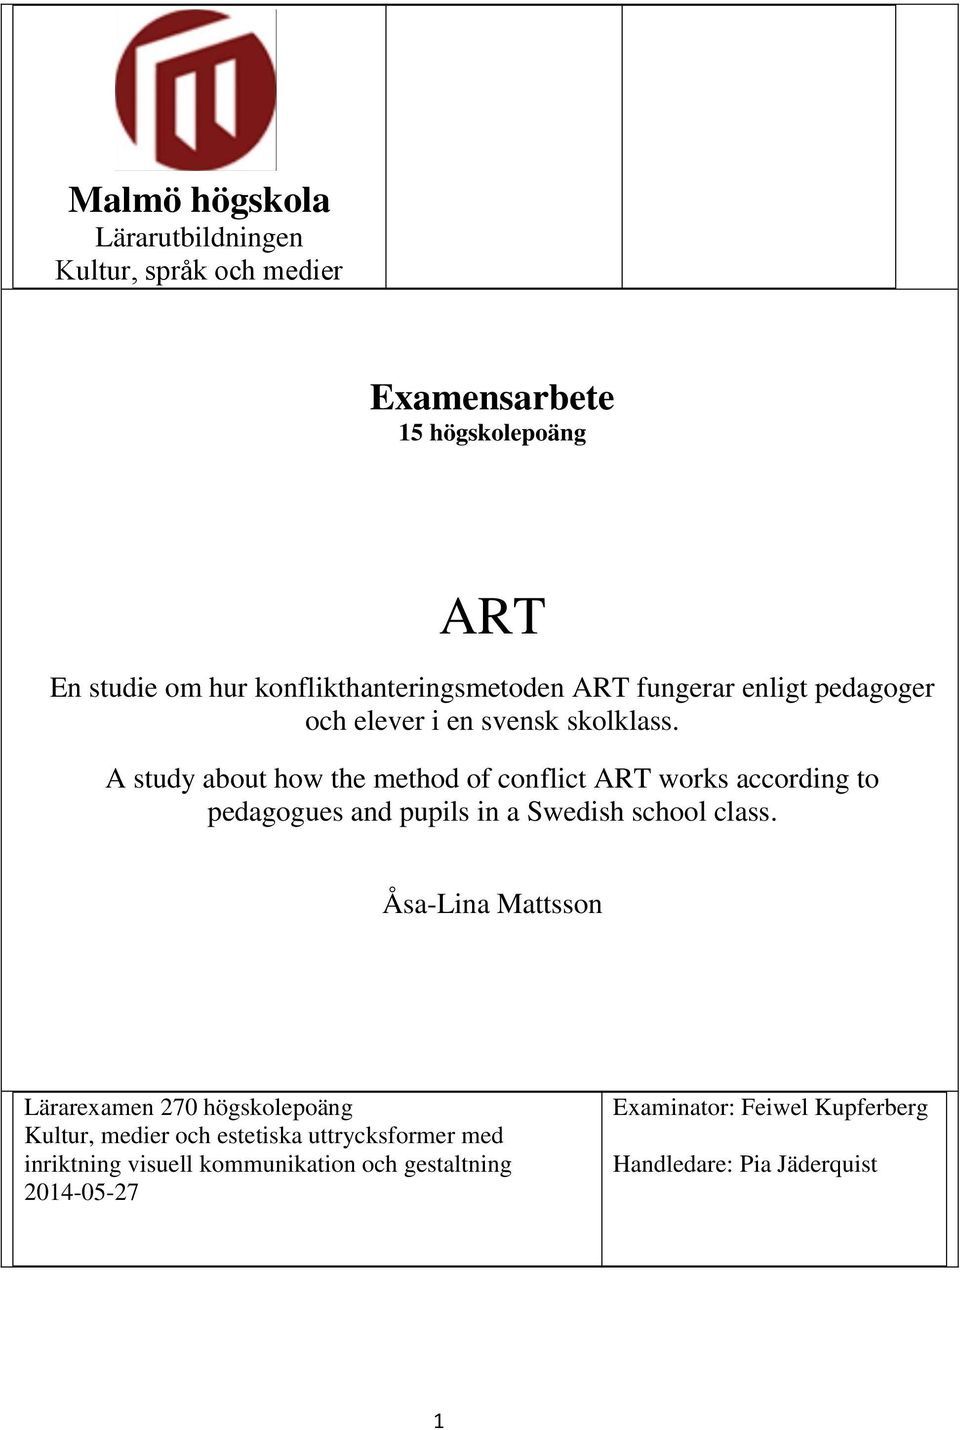 A study about how the method of conflict ART works according to pedagogues and pupils in a Swedish school class.